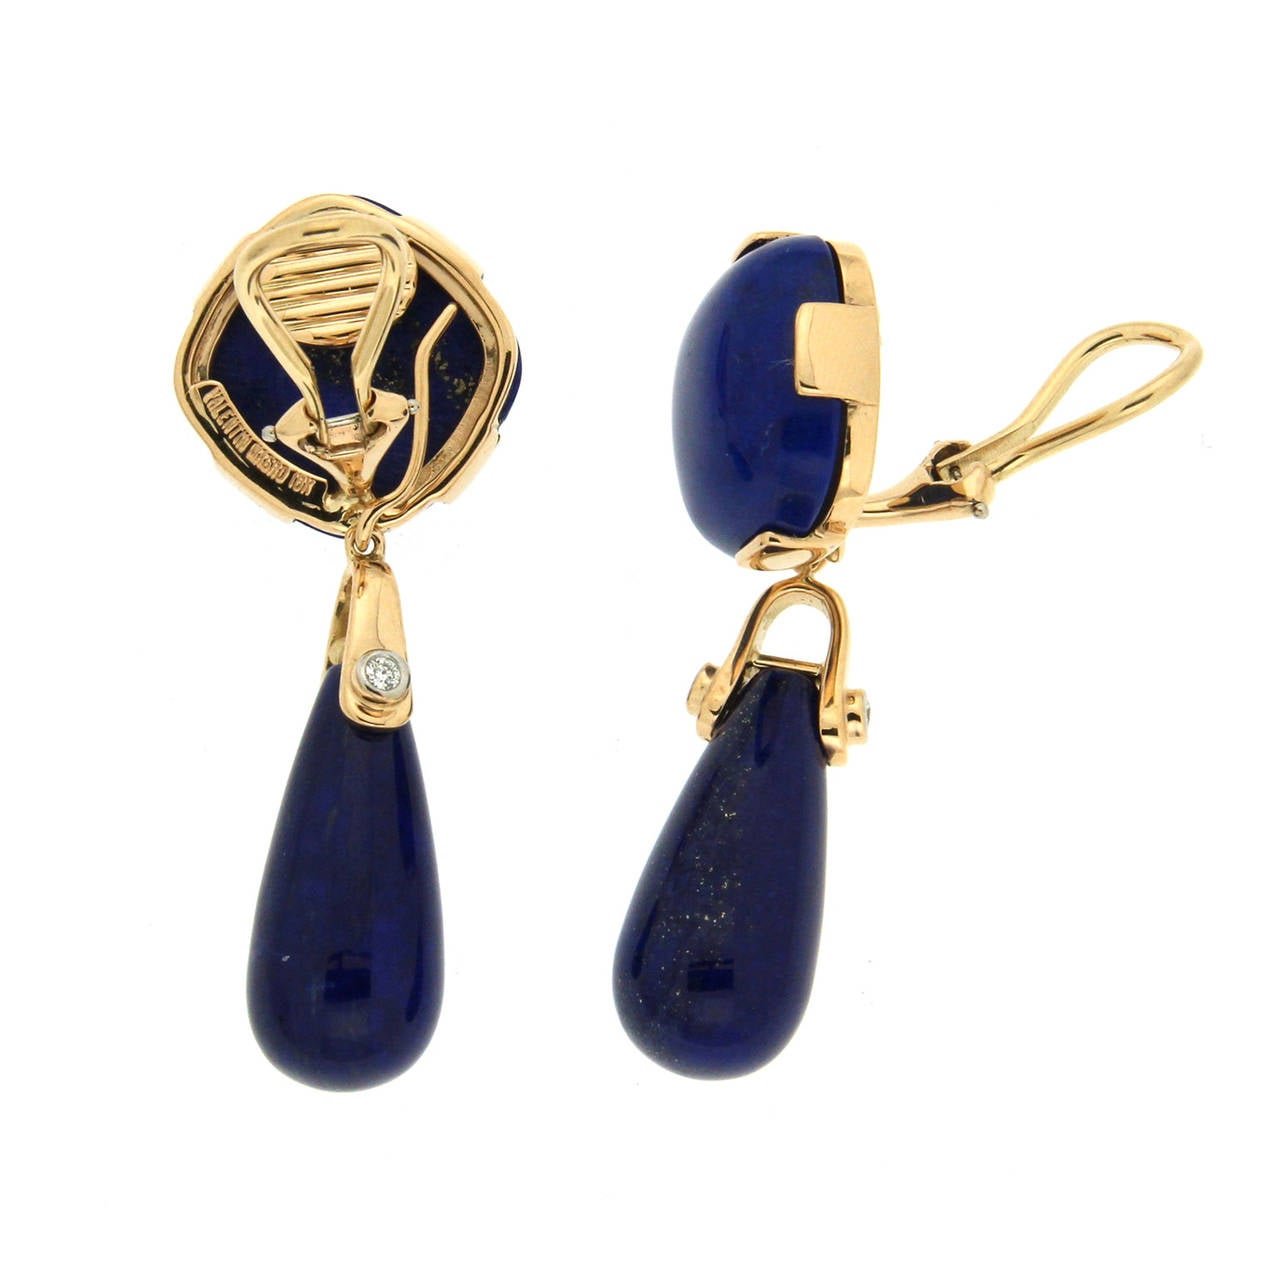 Round Cushion Lapis Cabochon Earrings with Lapis Tear Drops in 18K Yellow Gold.

Diamonds total weight 0.09ct